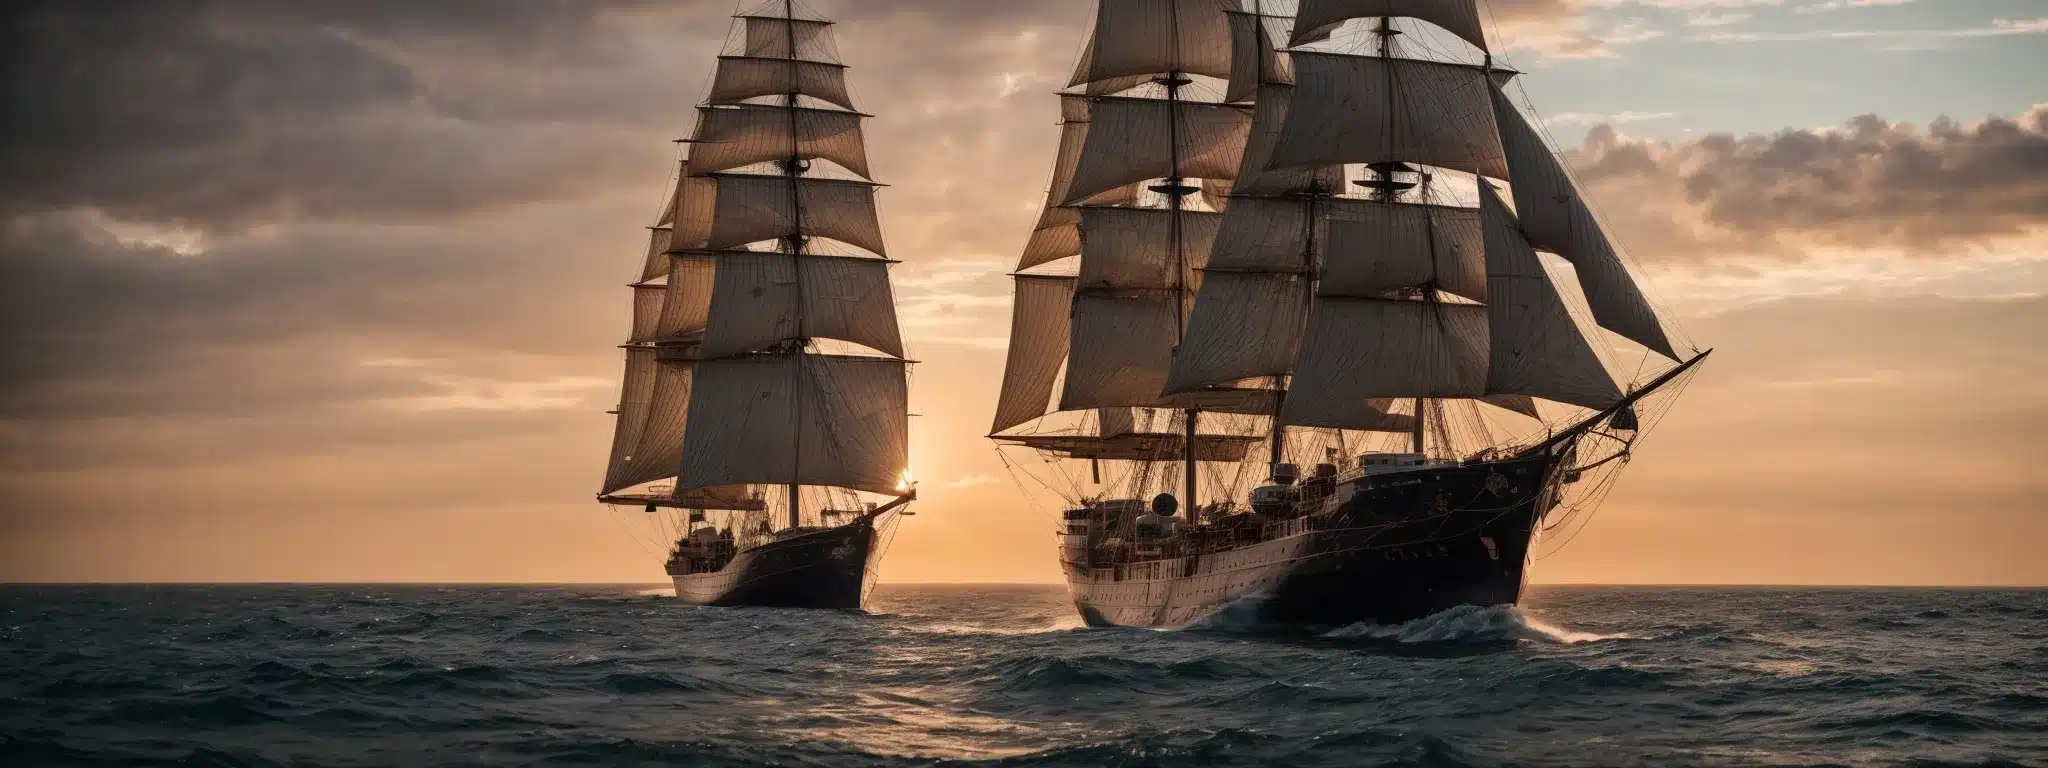 A Majestic Ship Adjusts Its Vibrant Sails Against A Backdrop Of A Horizon Teeming With The Glow Of Dawn.